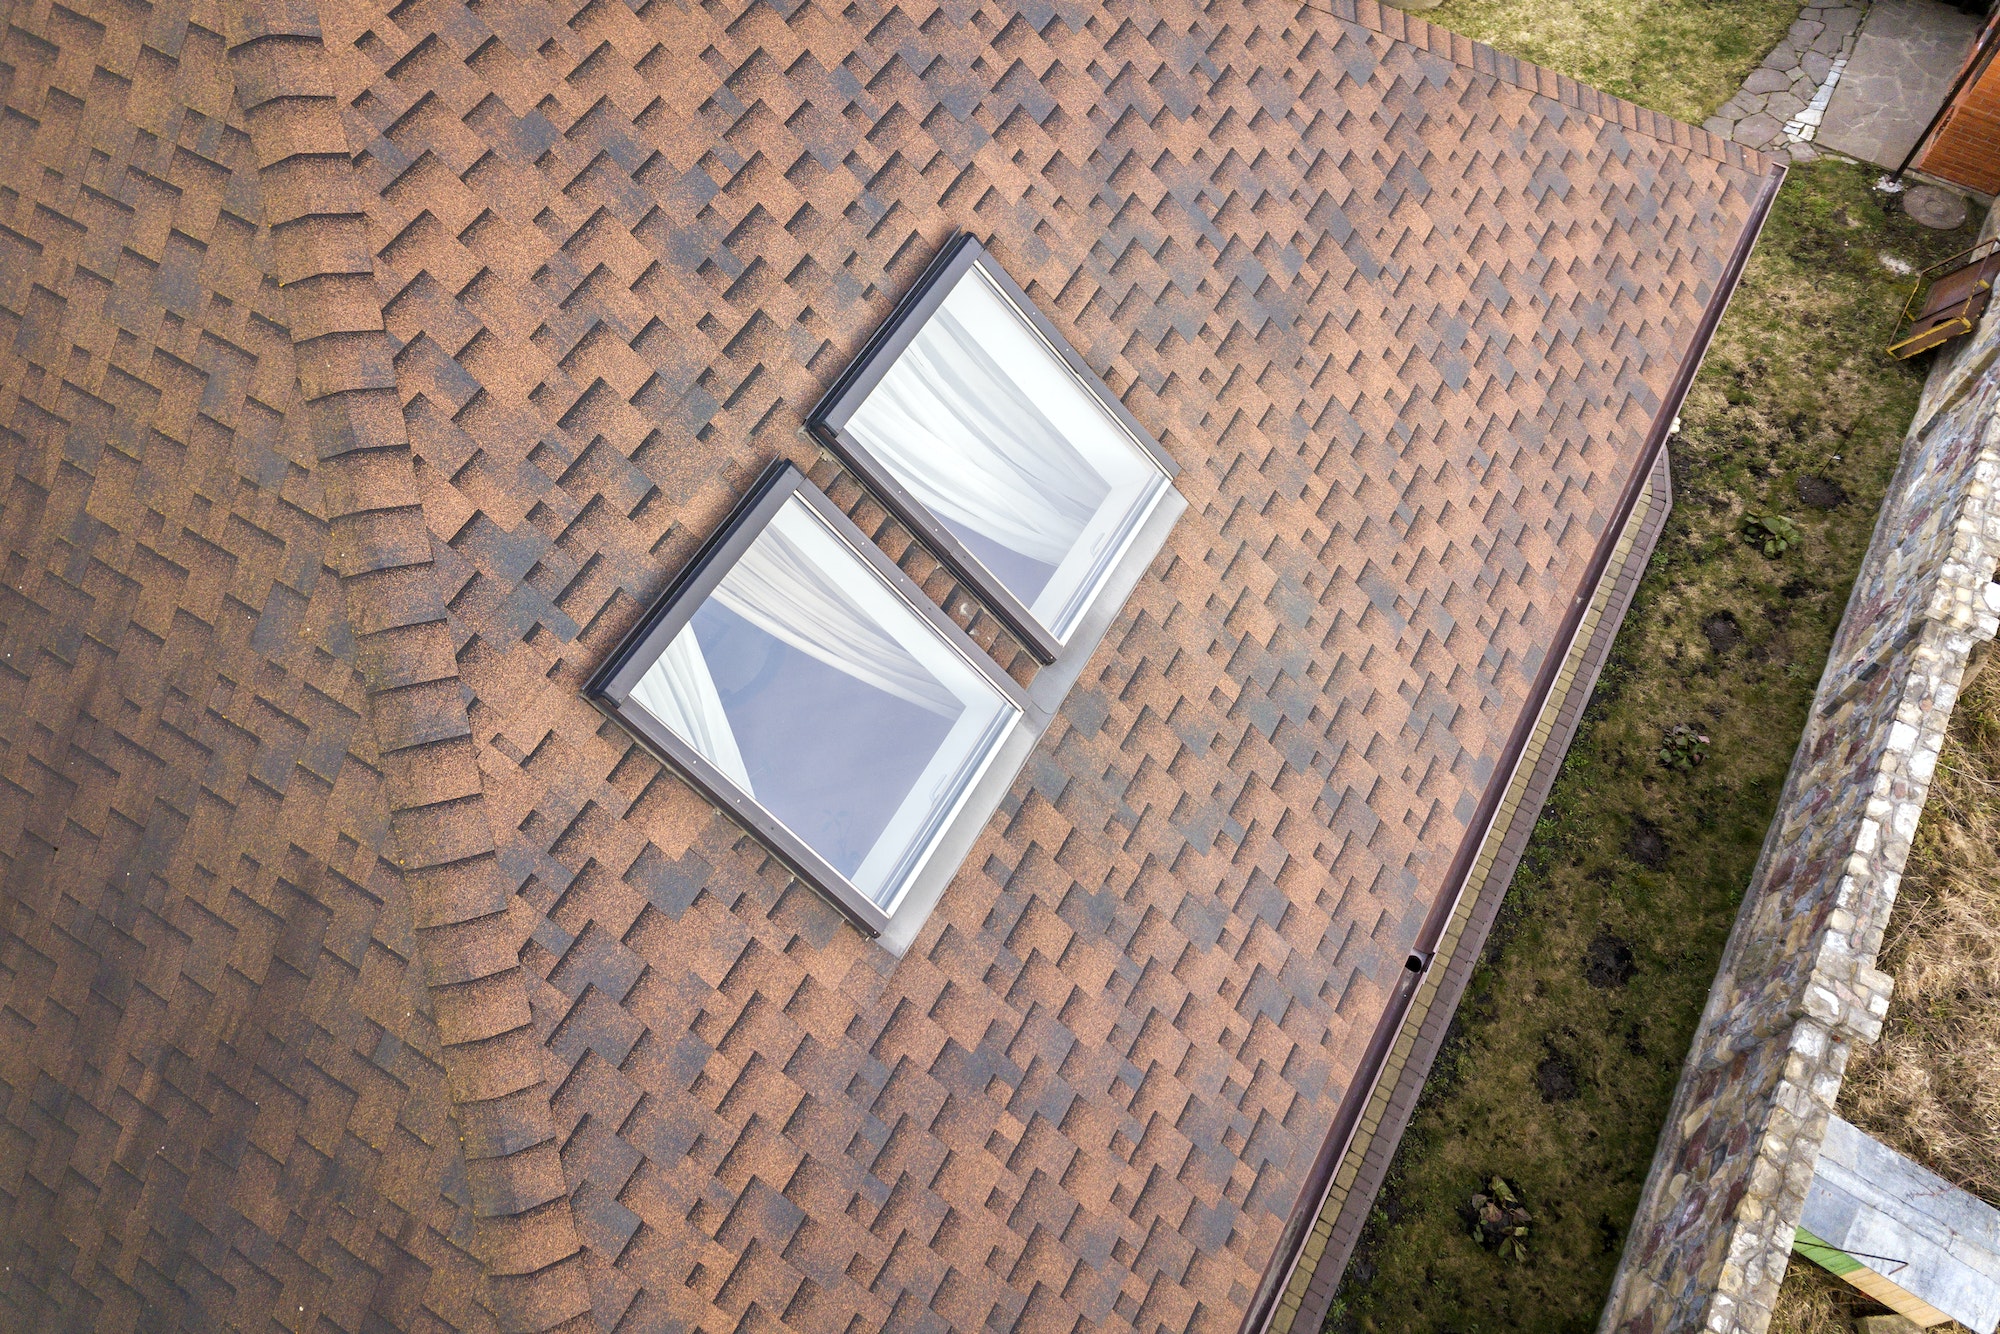 Close-up of new small attic plastic windows installed in brown shingled house roof.